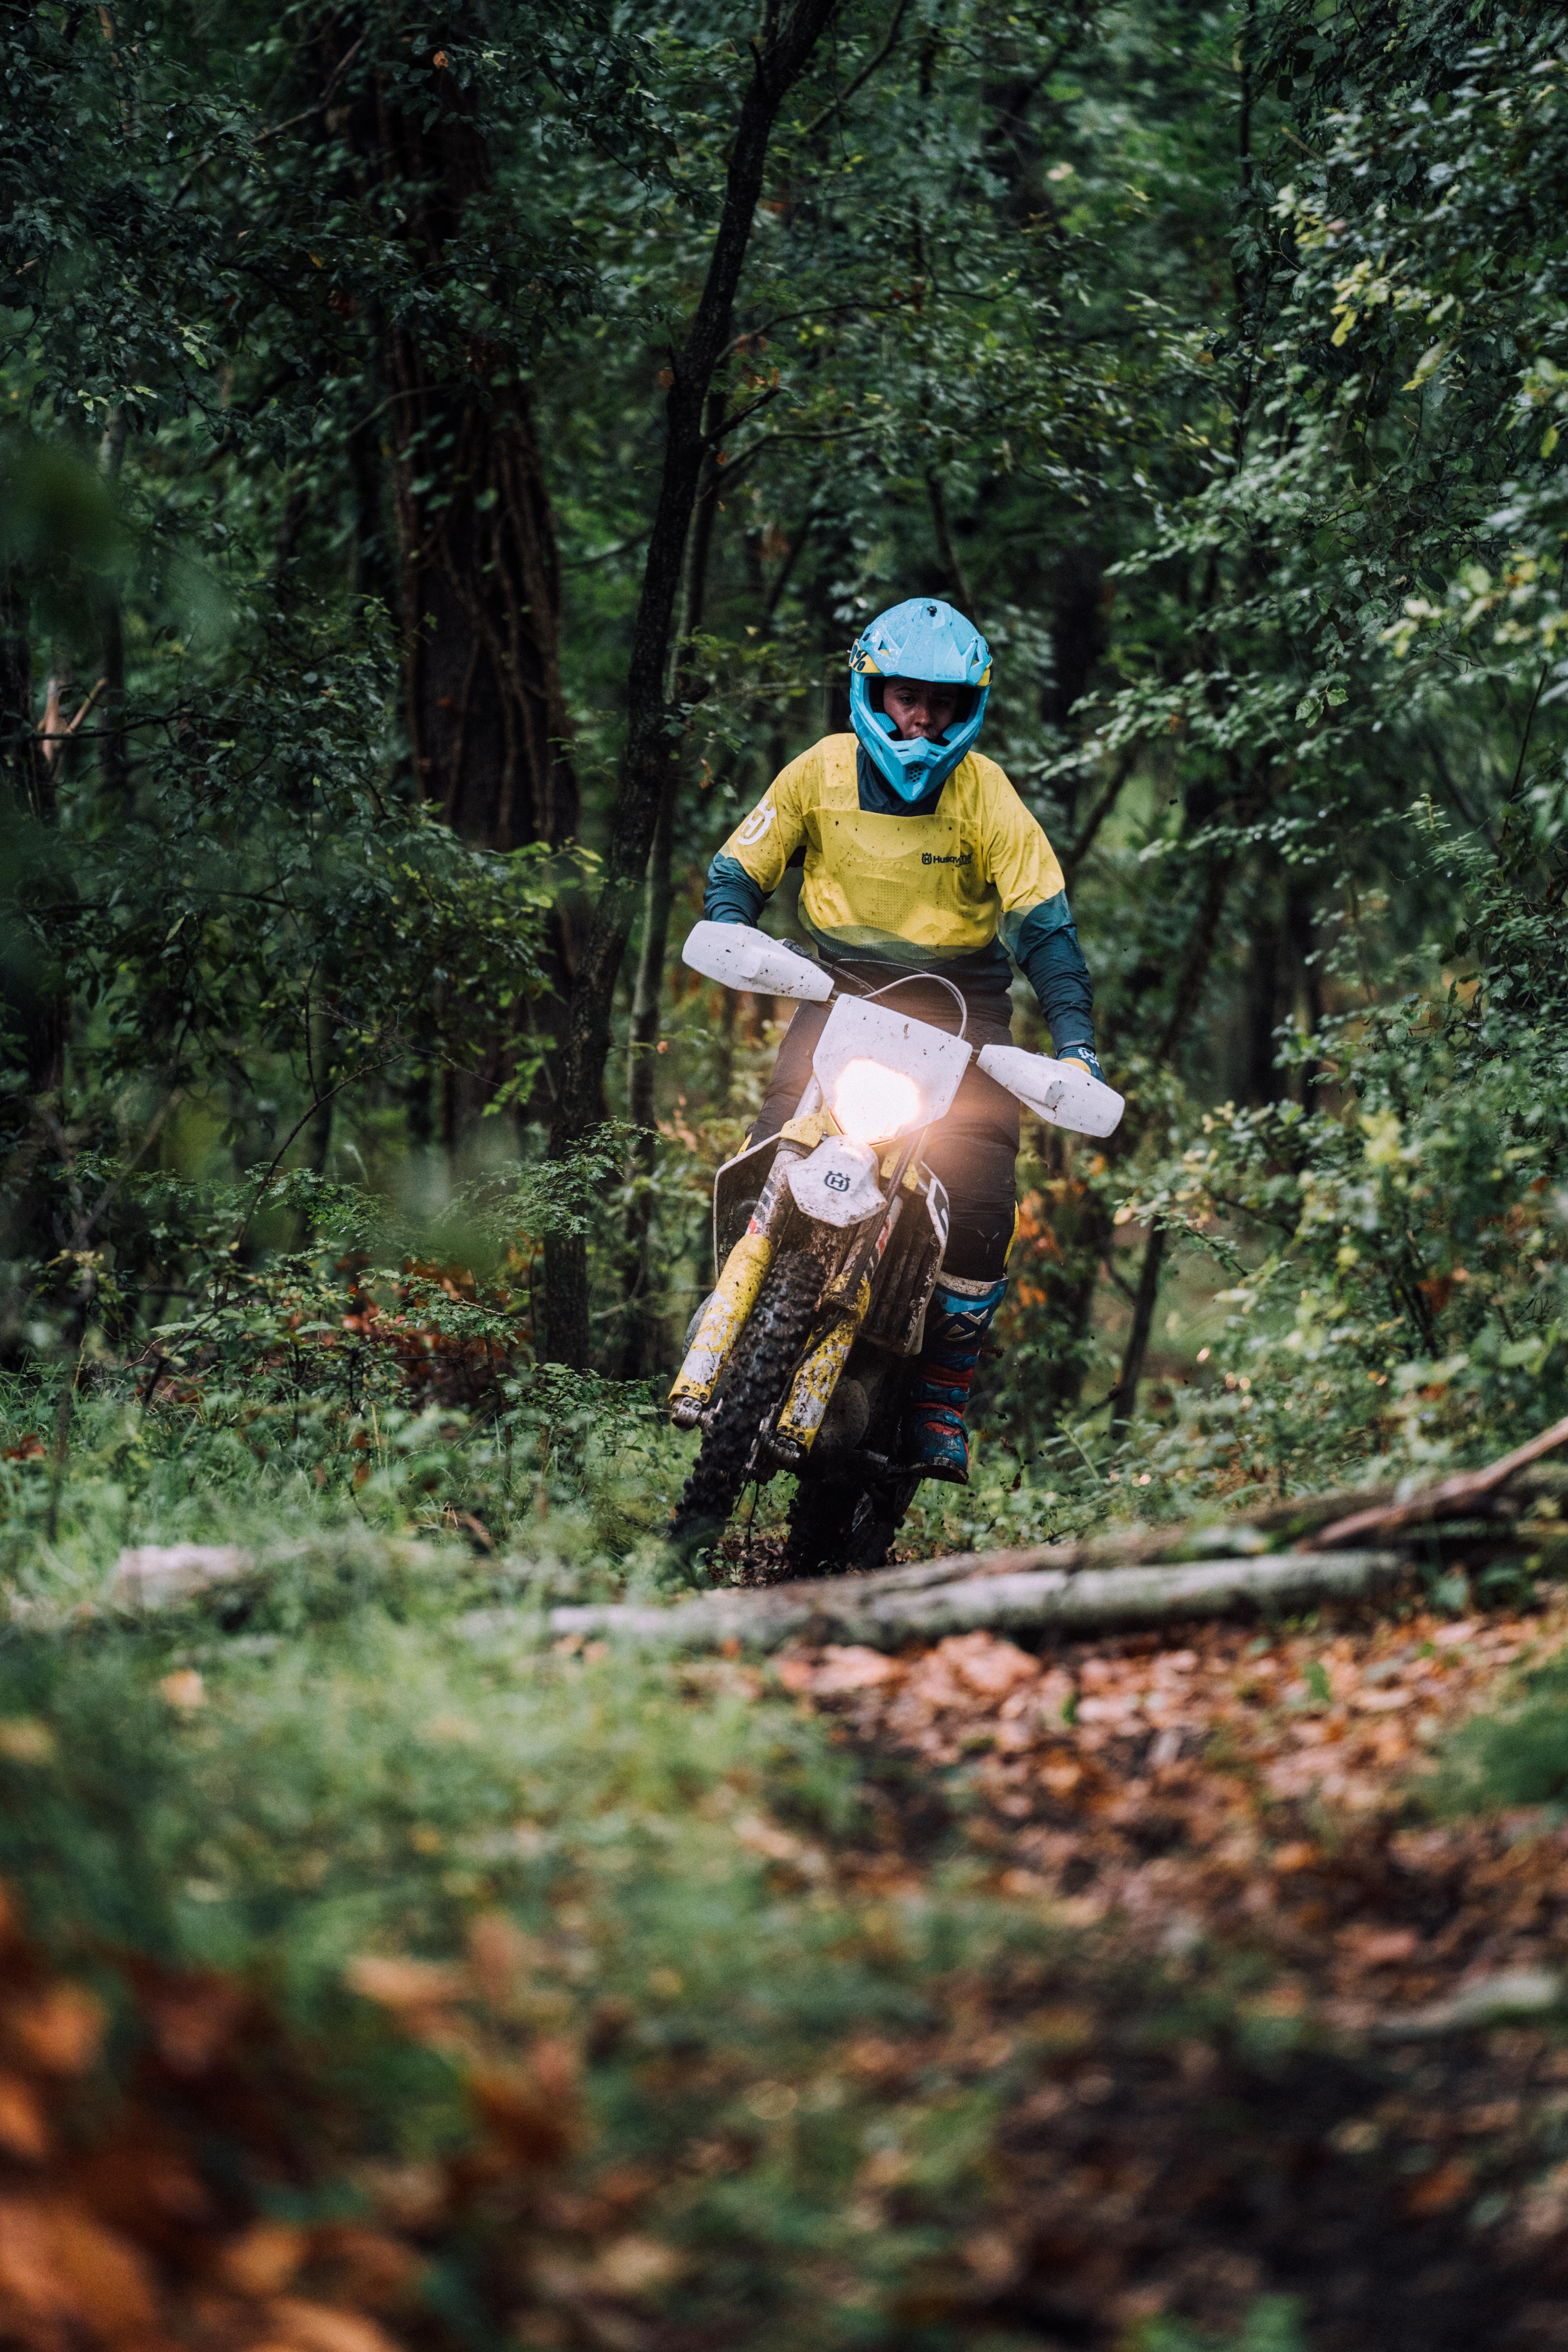 motorcyclist, bike, motorcycles, forest, traffic, movement, helmet, motorcycle QHD